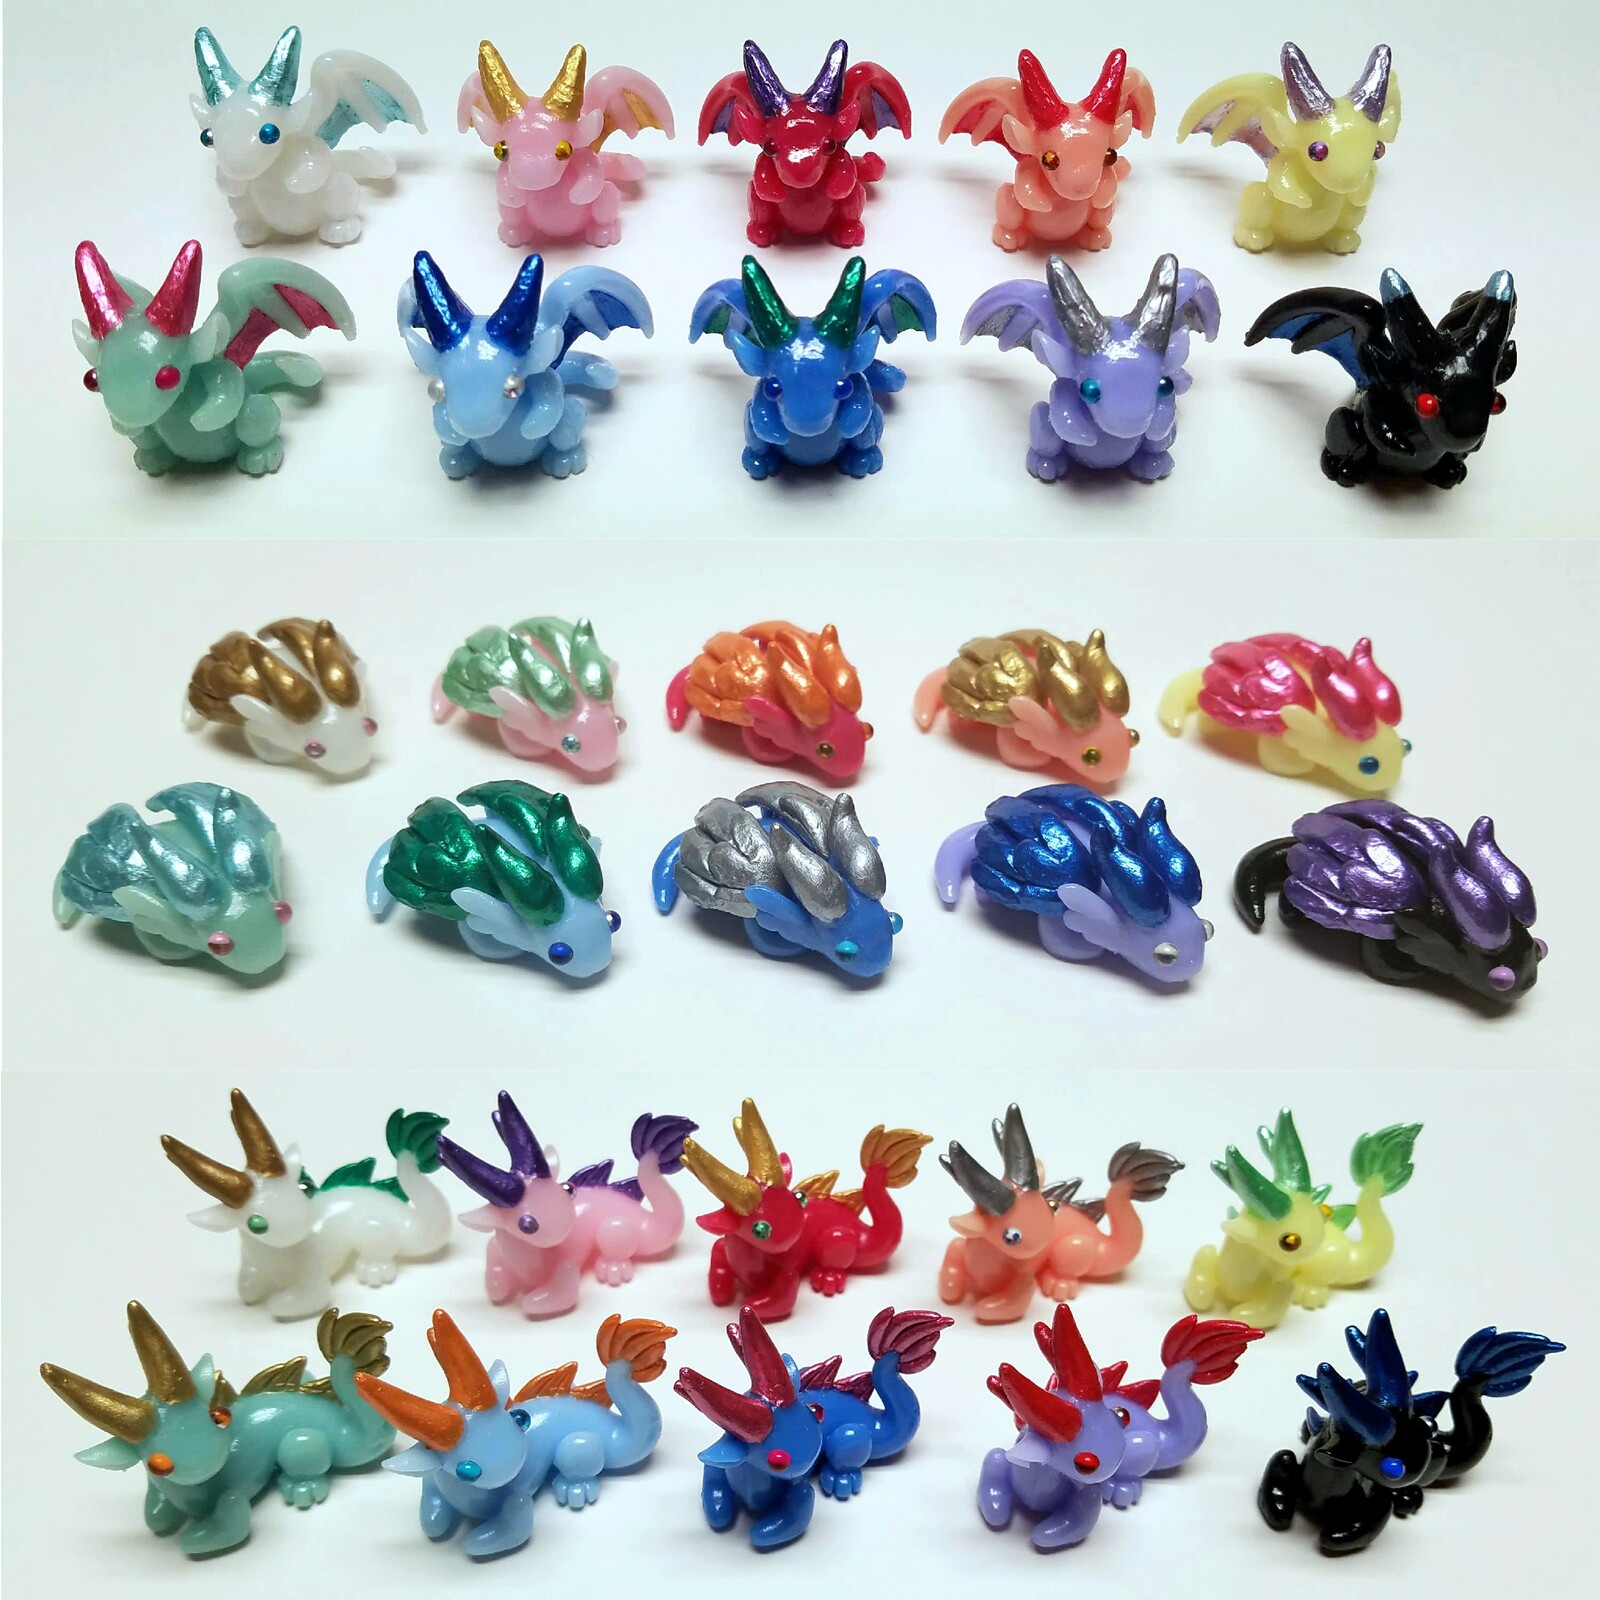 Small Dwagon figures roughly 1.5-2 inches. Come in a variety of colors and styles. Resin cast with hand painted details. 